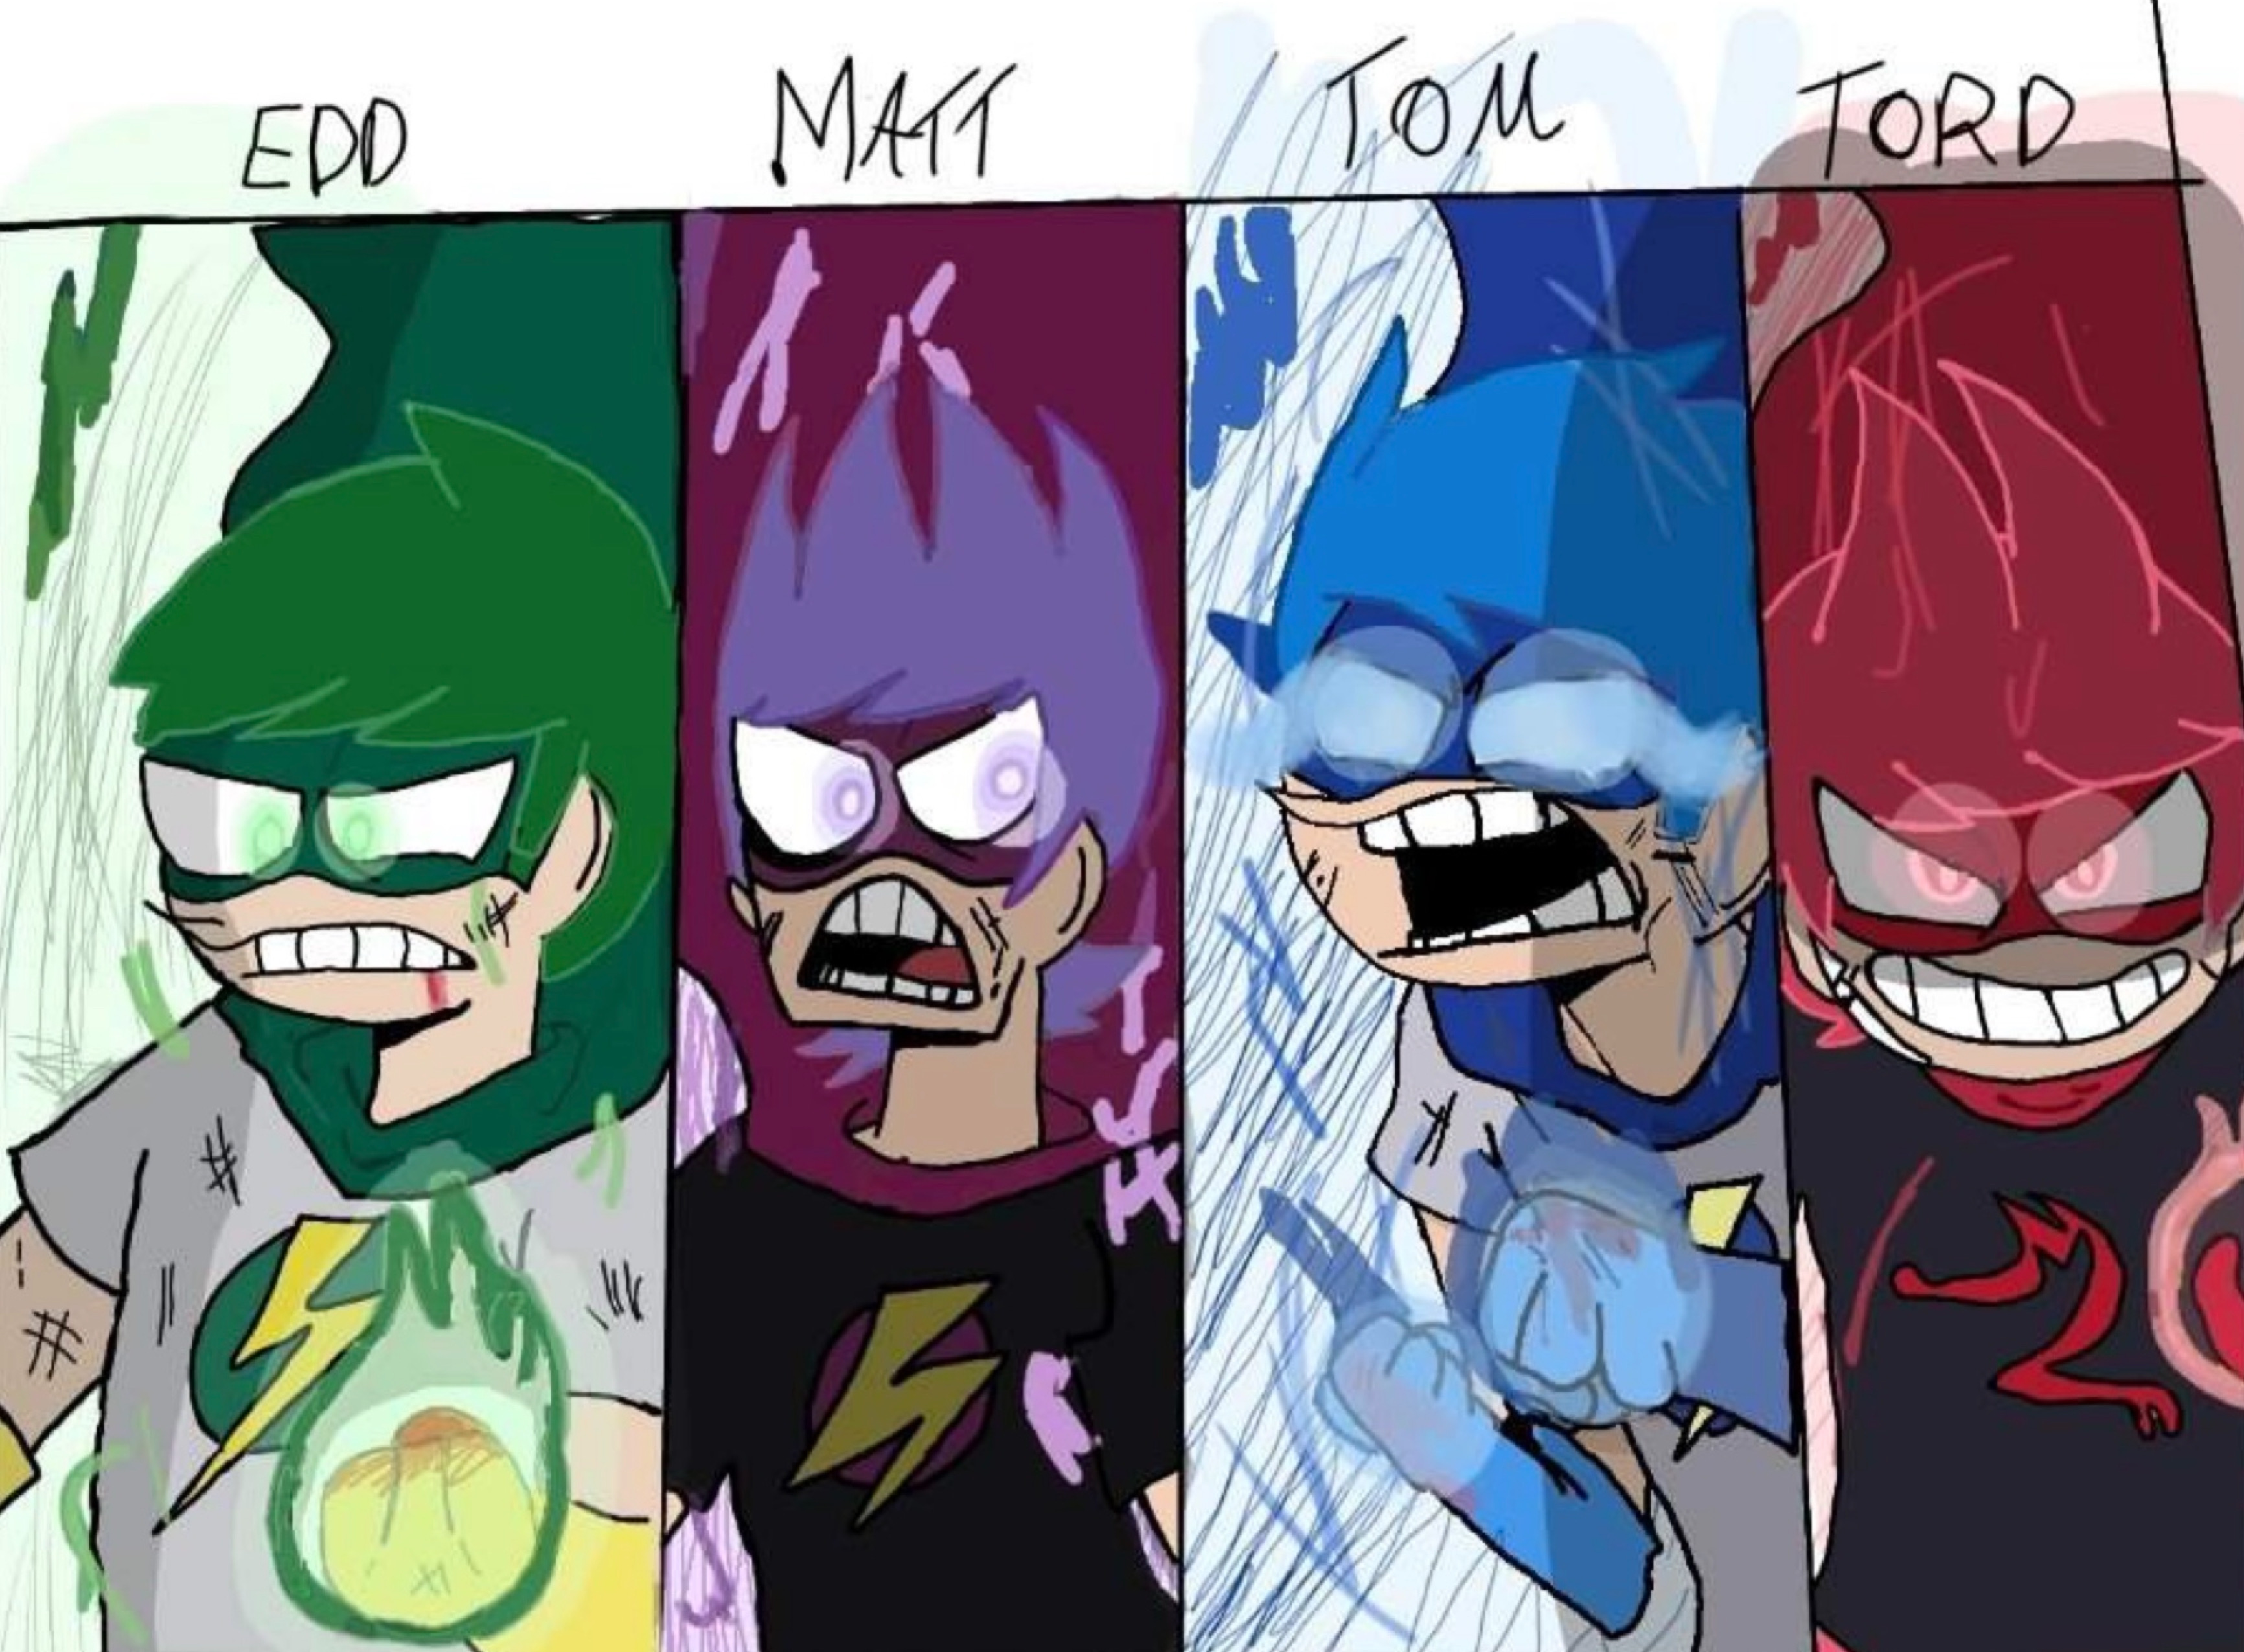 When I was younger, I thought Matt from Eddsworld and Matt from Cyberchase  were the same person. Anybody got the same feeling? : r/Eddsworld